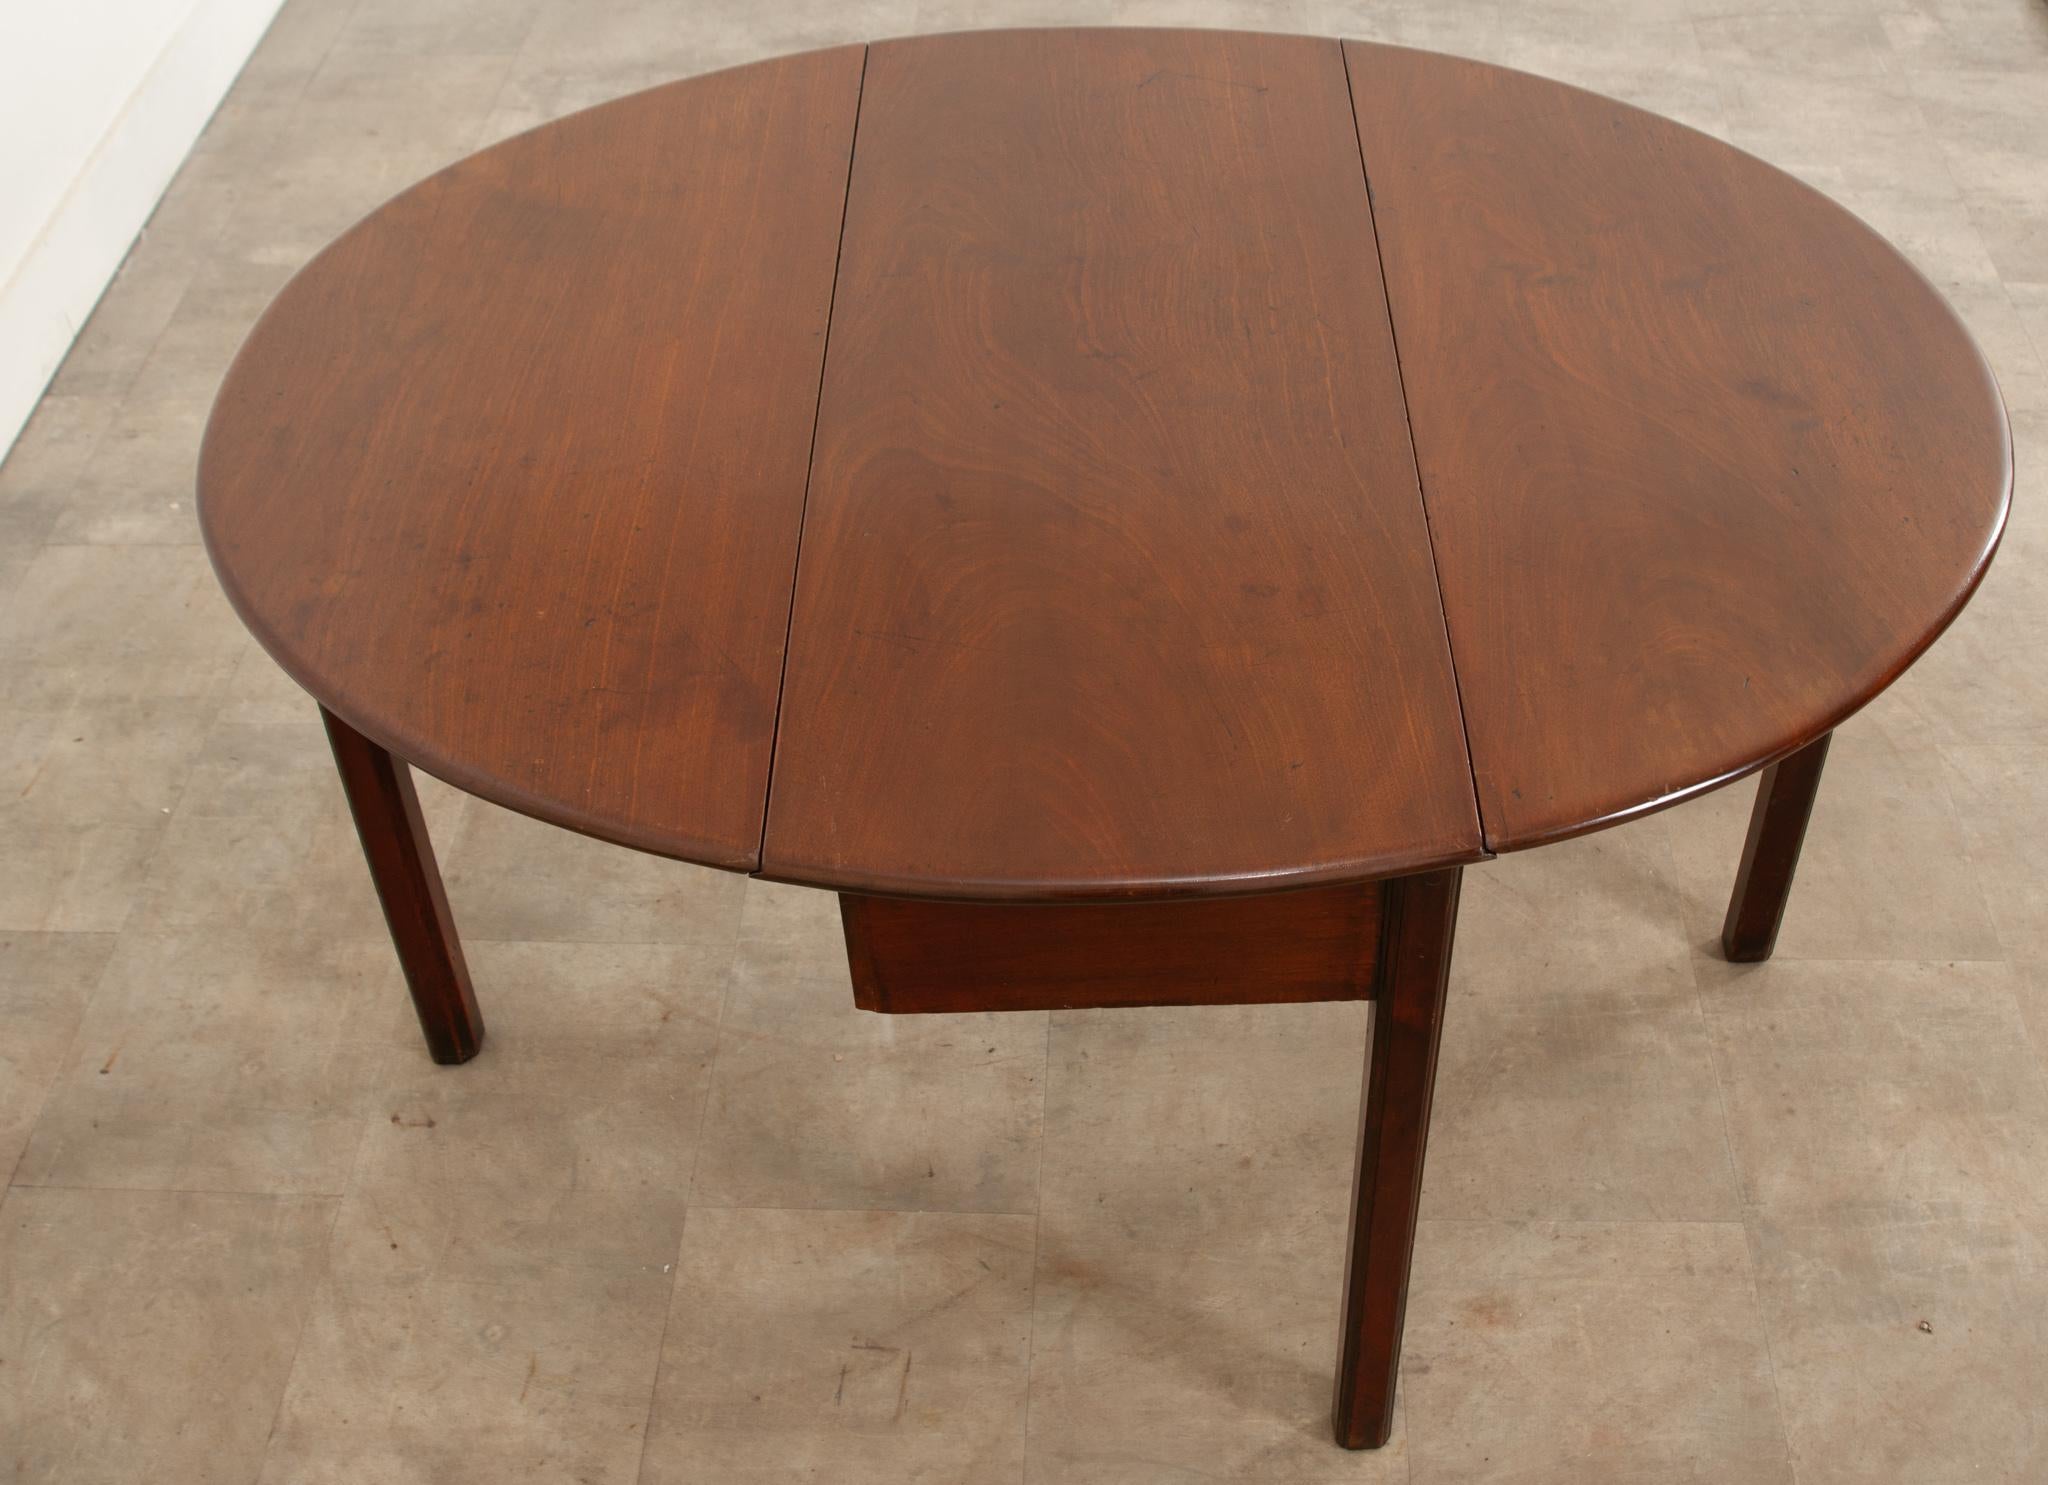 Patinated English 19th Century Mahogany Drop Leaf Table For Sale